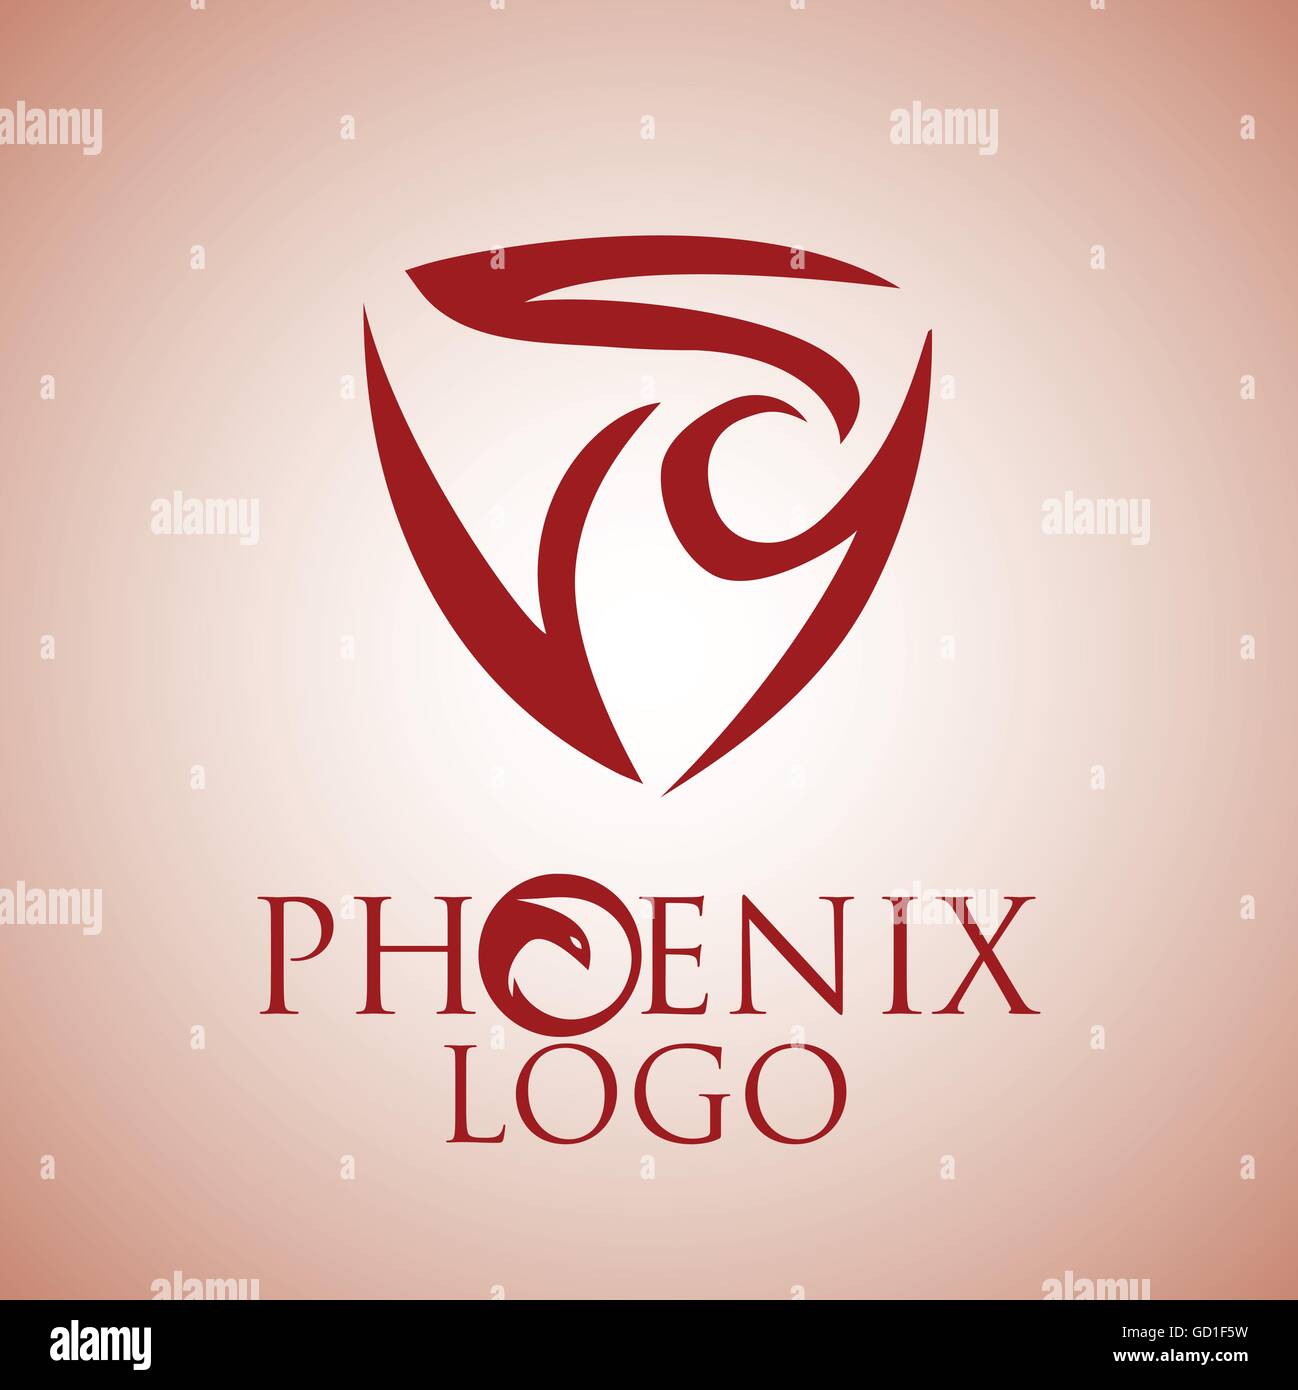 phoenix logo designed in a simple way so it can be use for multiple proposes like logo ,mark ,symbol or icon. Stock Vector